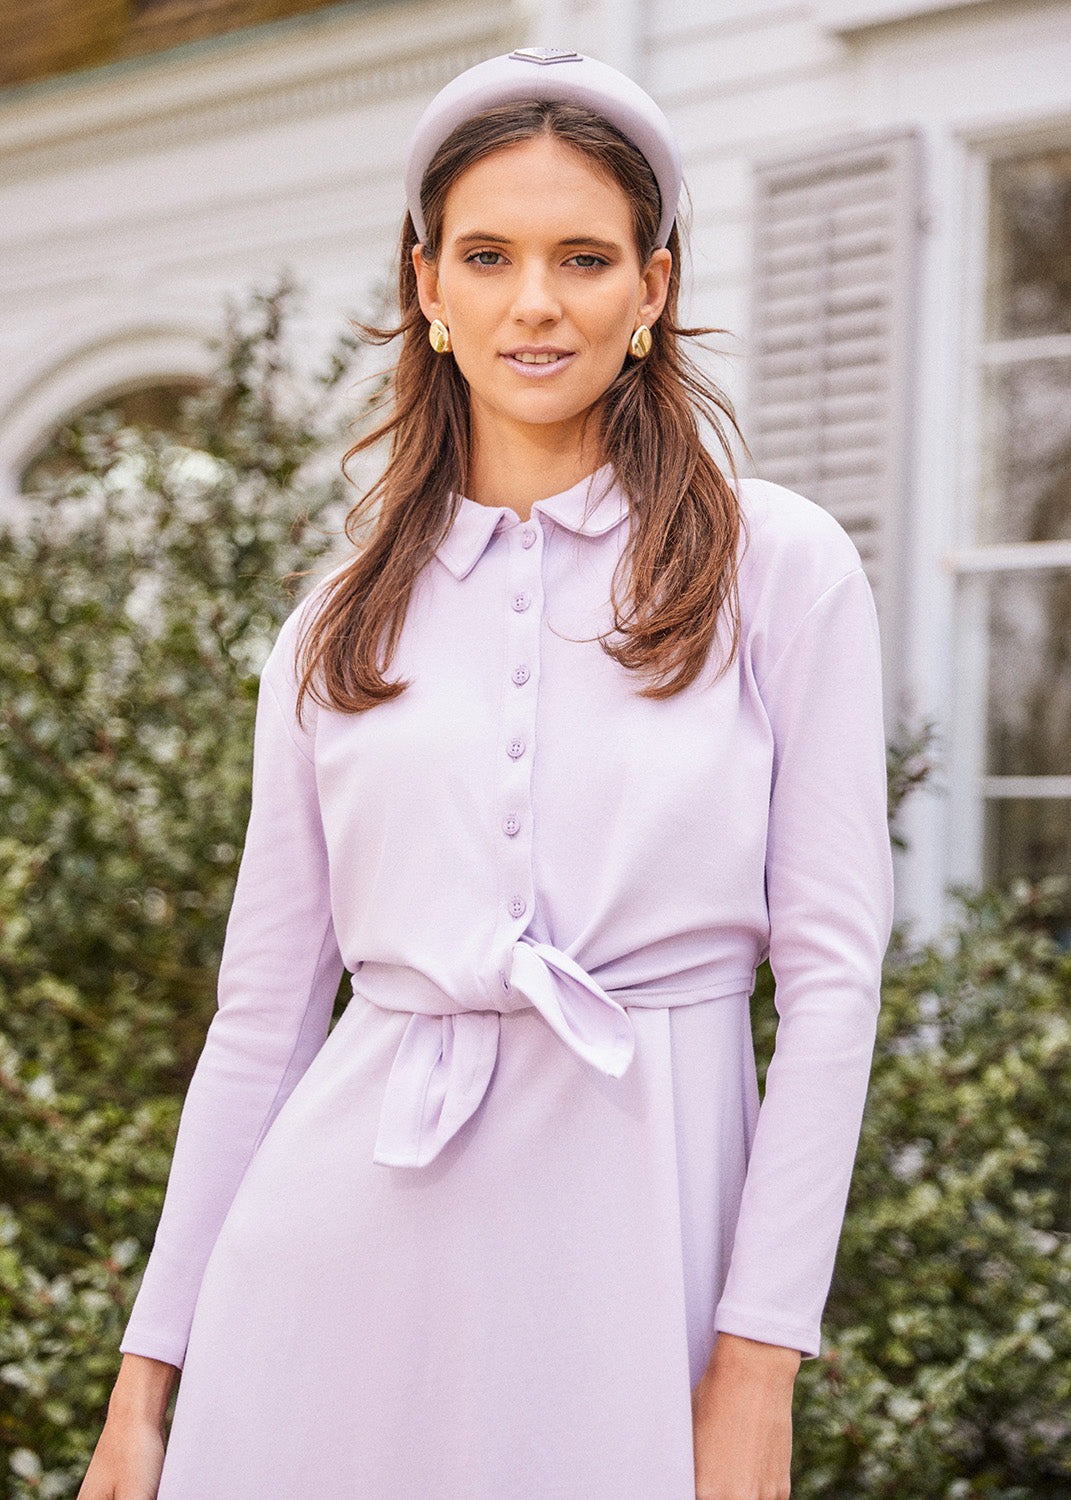 Young woman wearing the Tie Front Button Down Shirt in lavender over matching dress and matching headband